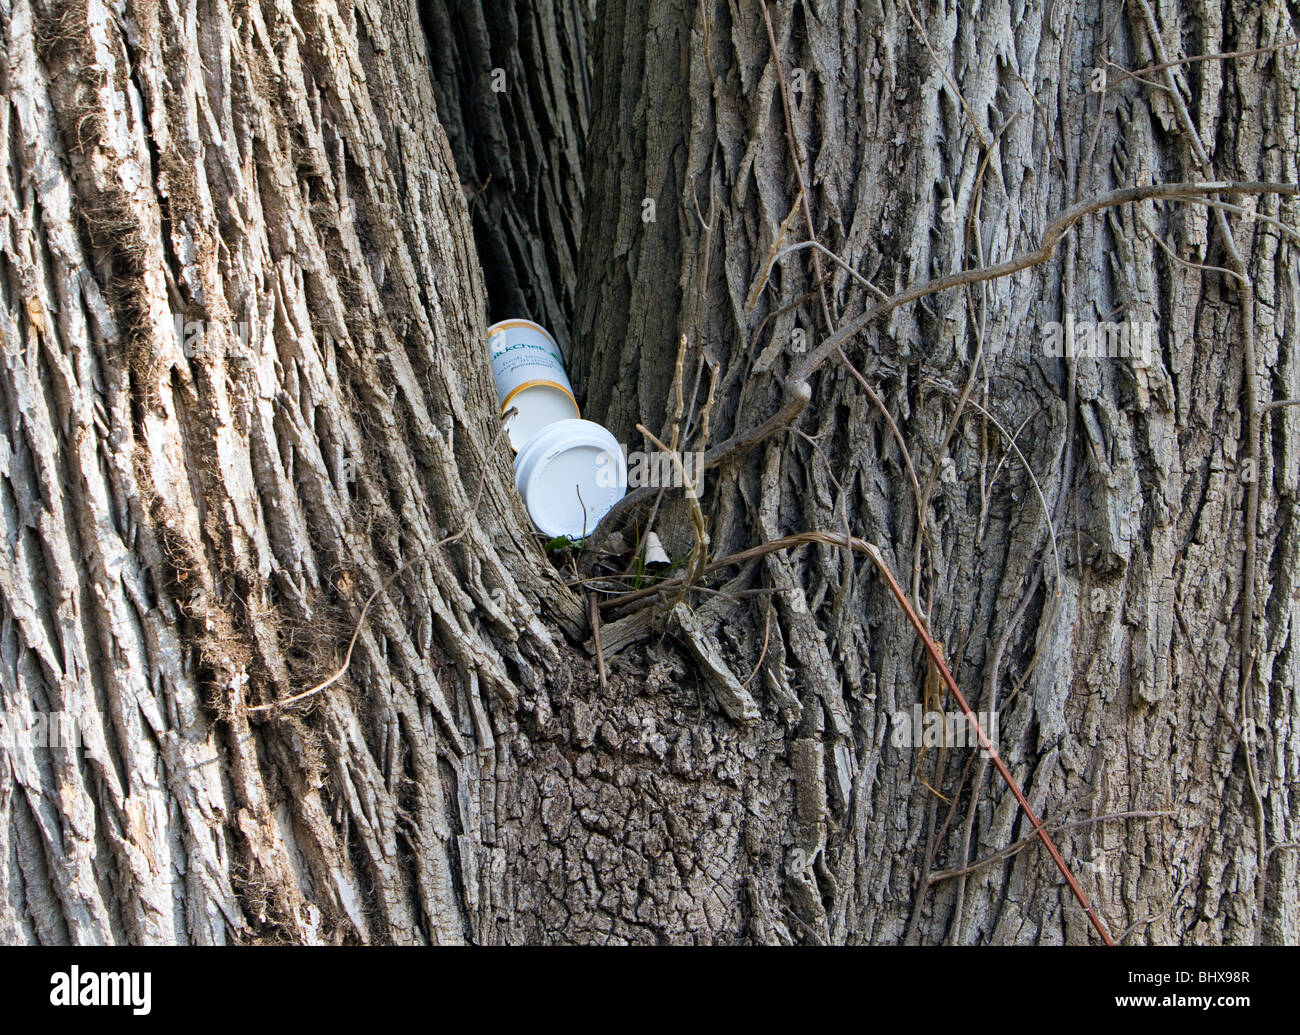 Paper coffee takeout container litter stuck in the fork of a big old tree. Stock Photo